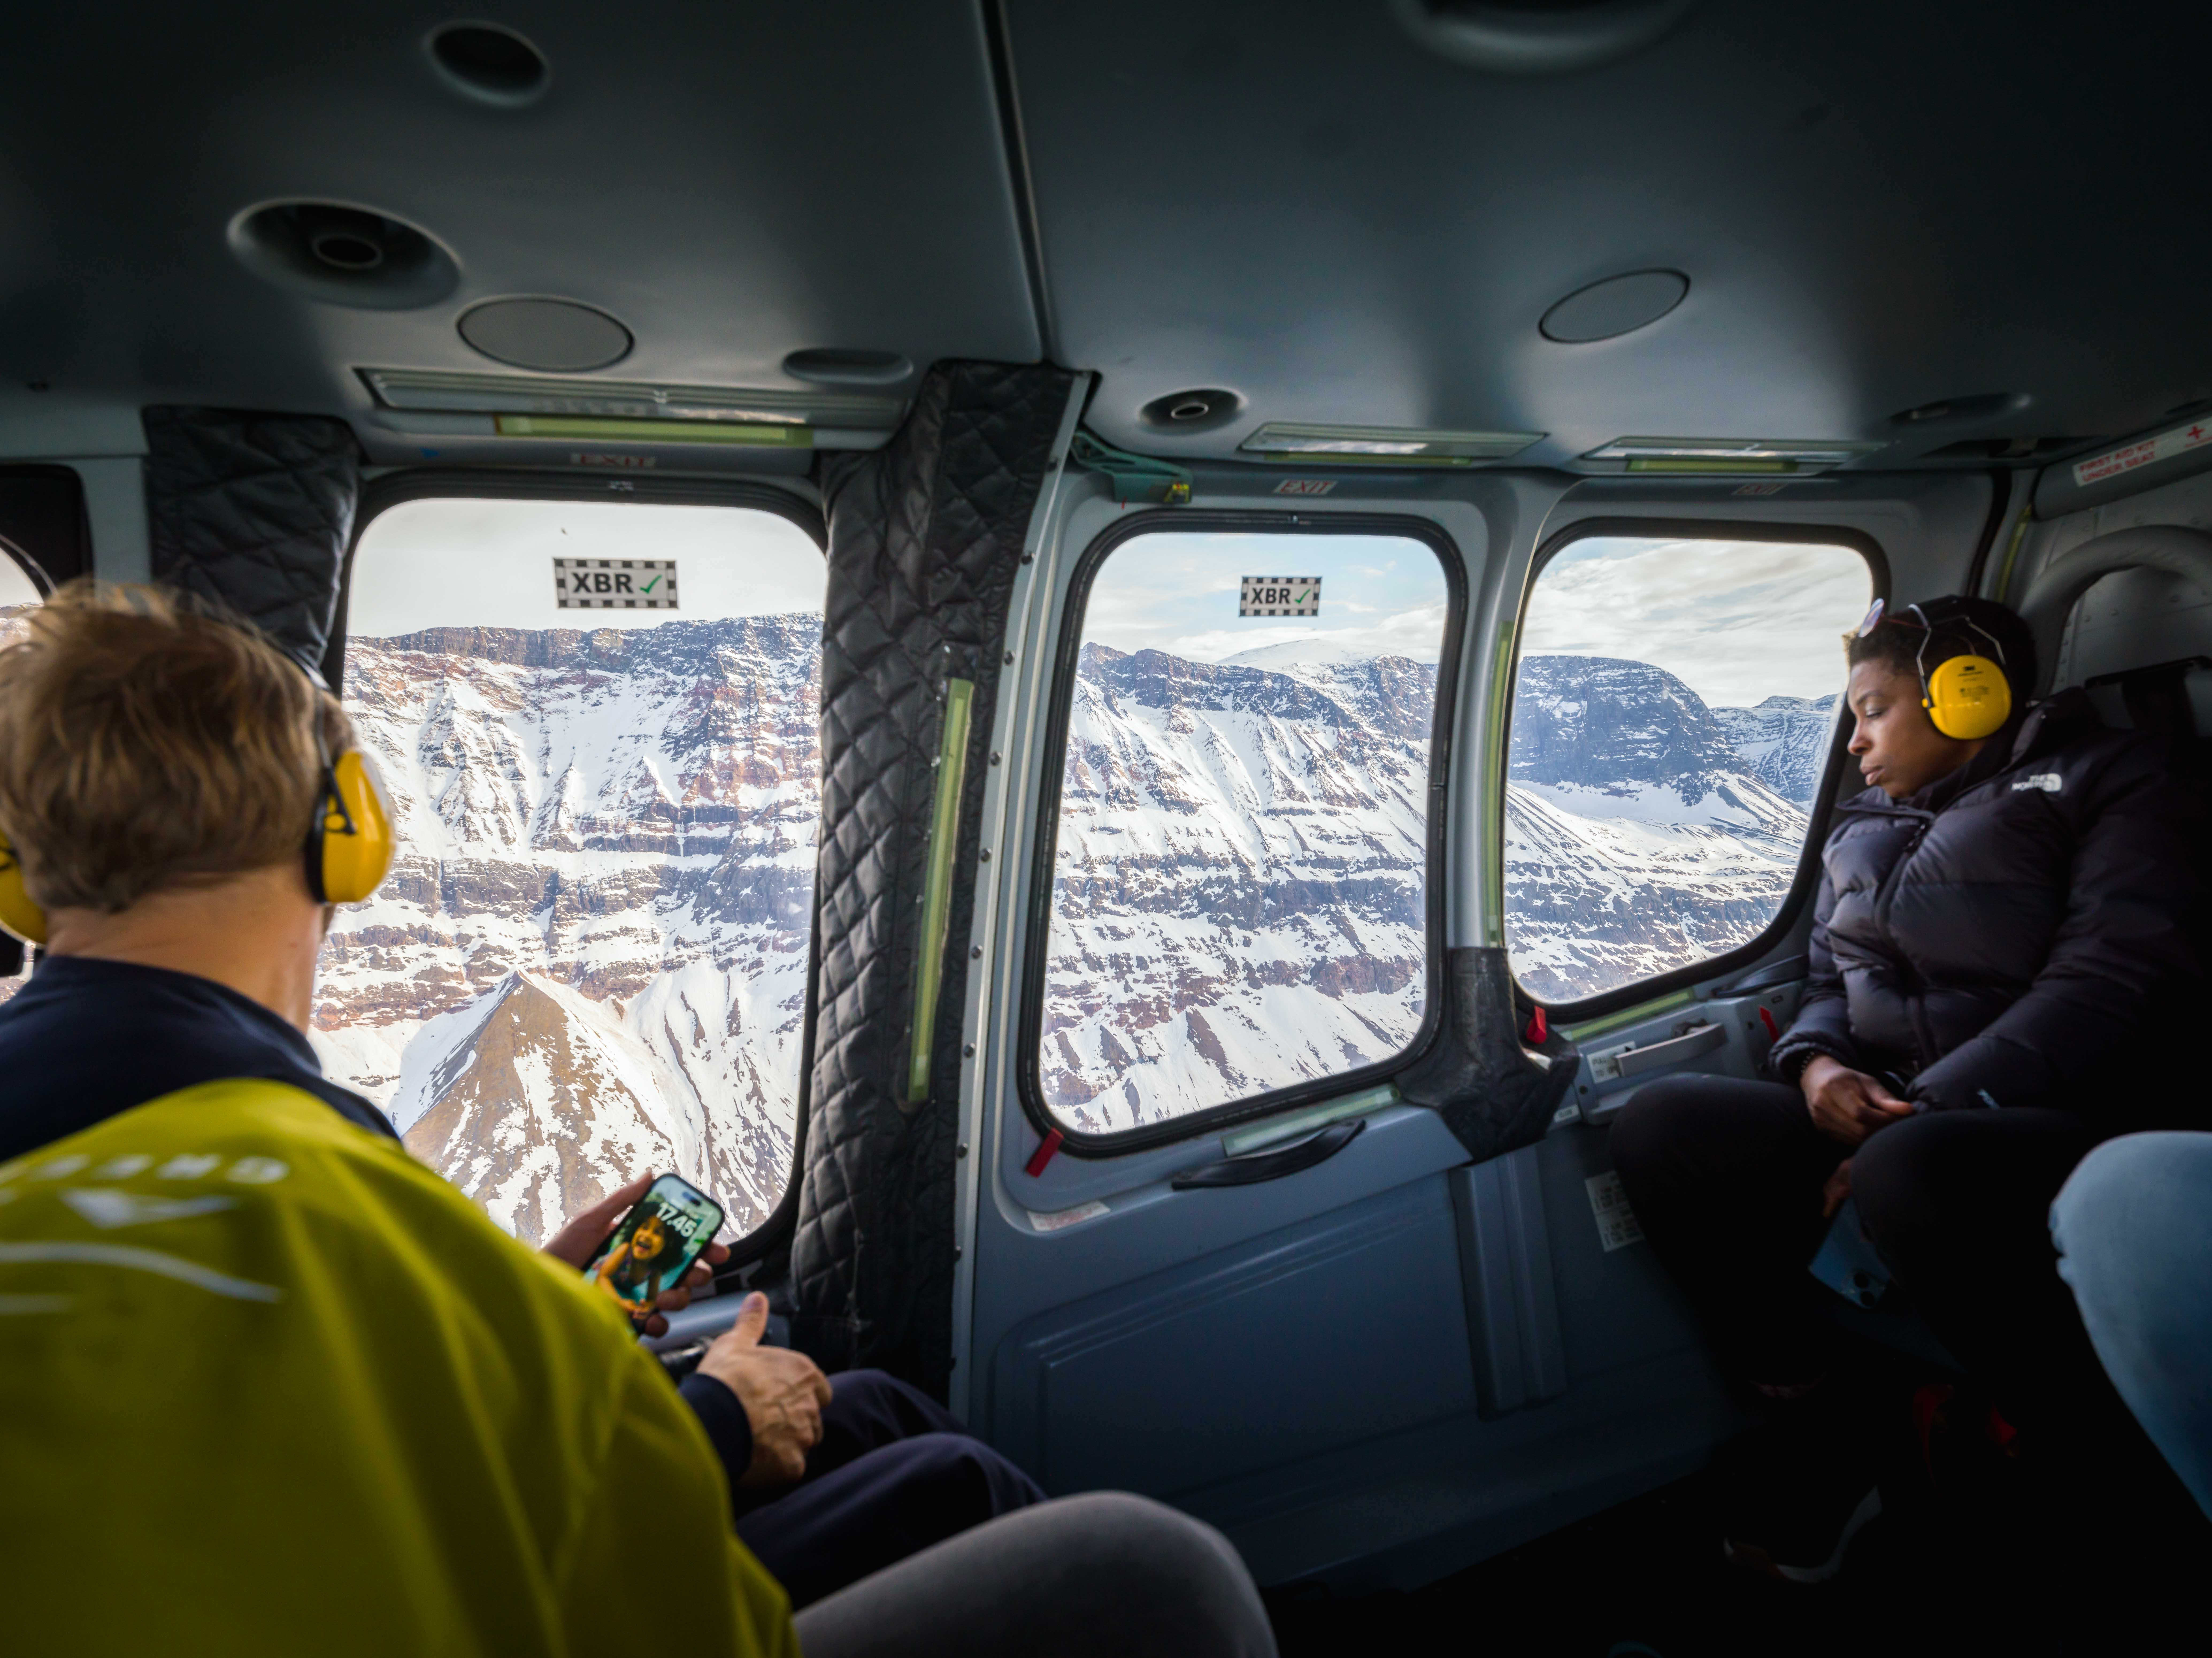 A woman wearing yellow ear protection and a black jacket looks out an aircraft window at a snowy and rugged landscape.